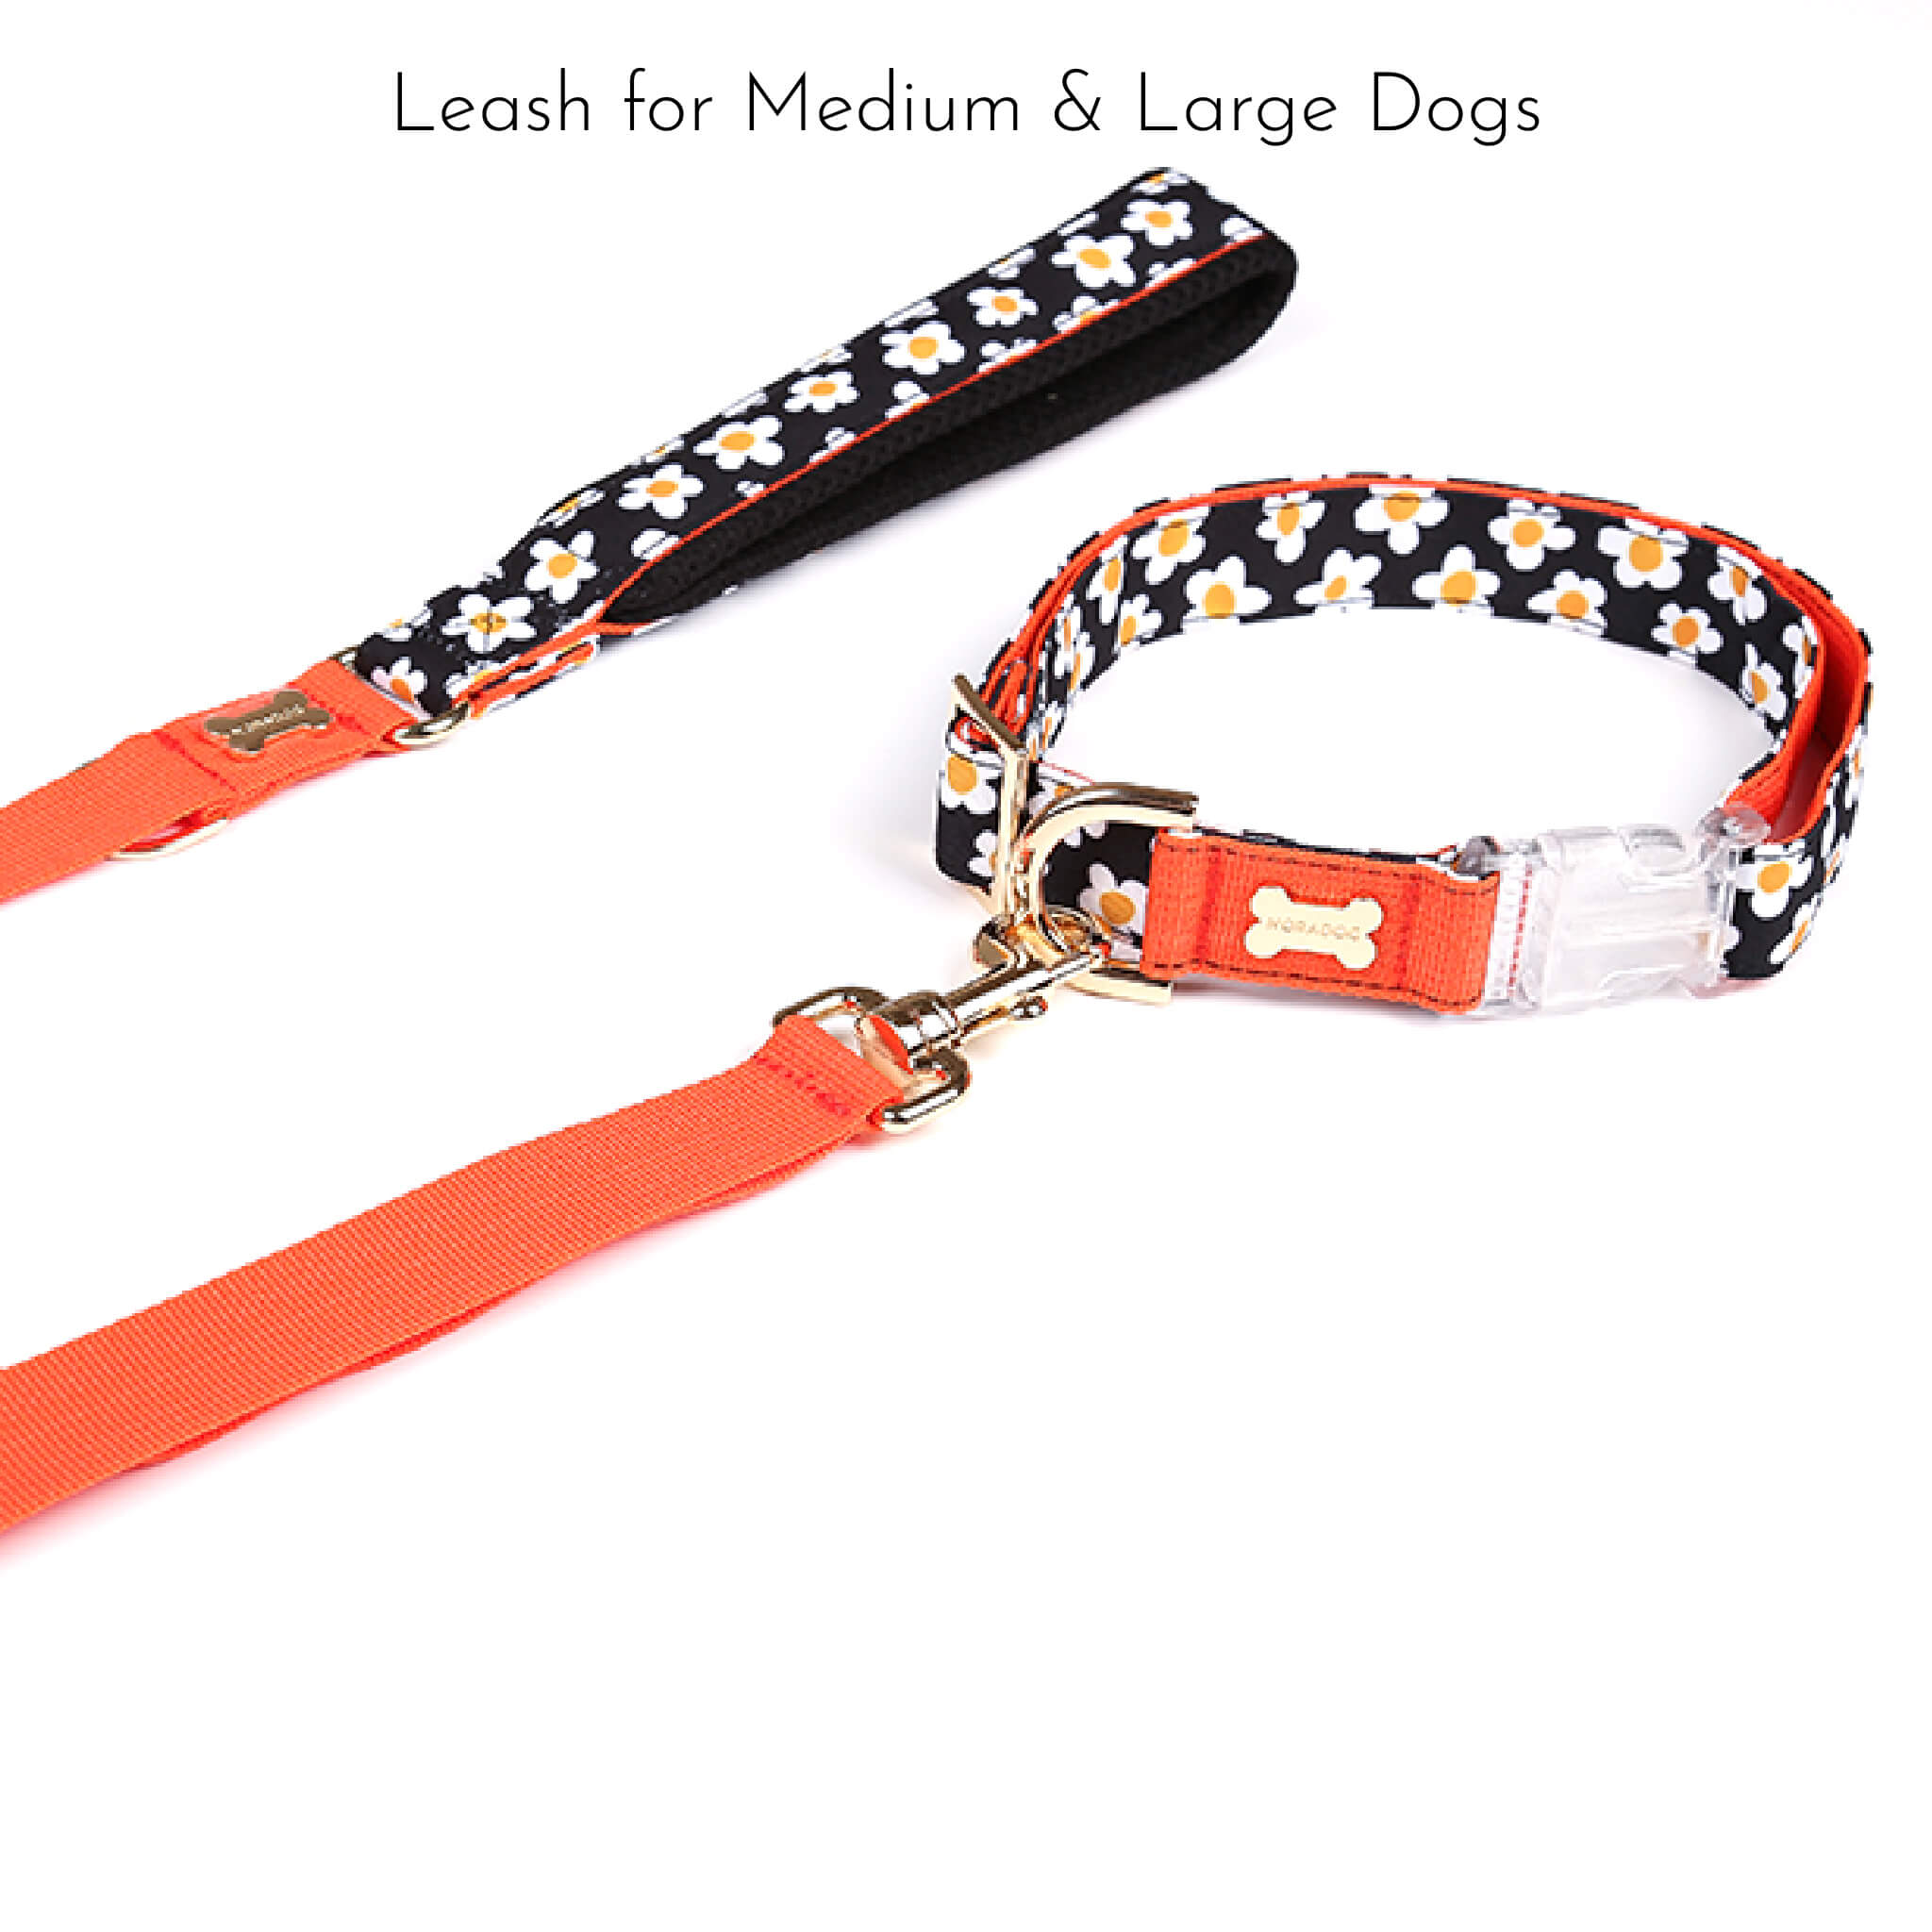 leash for medium & large dogs.